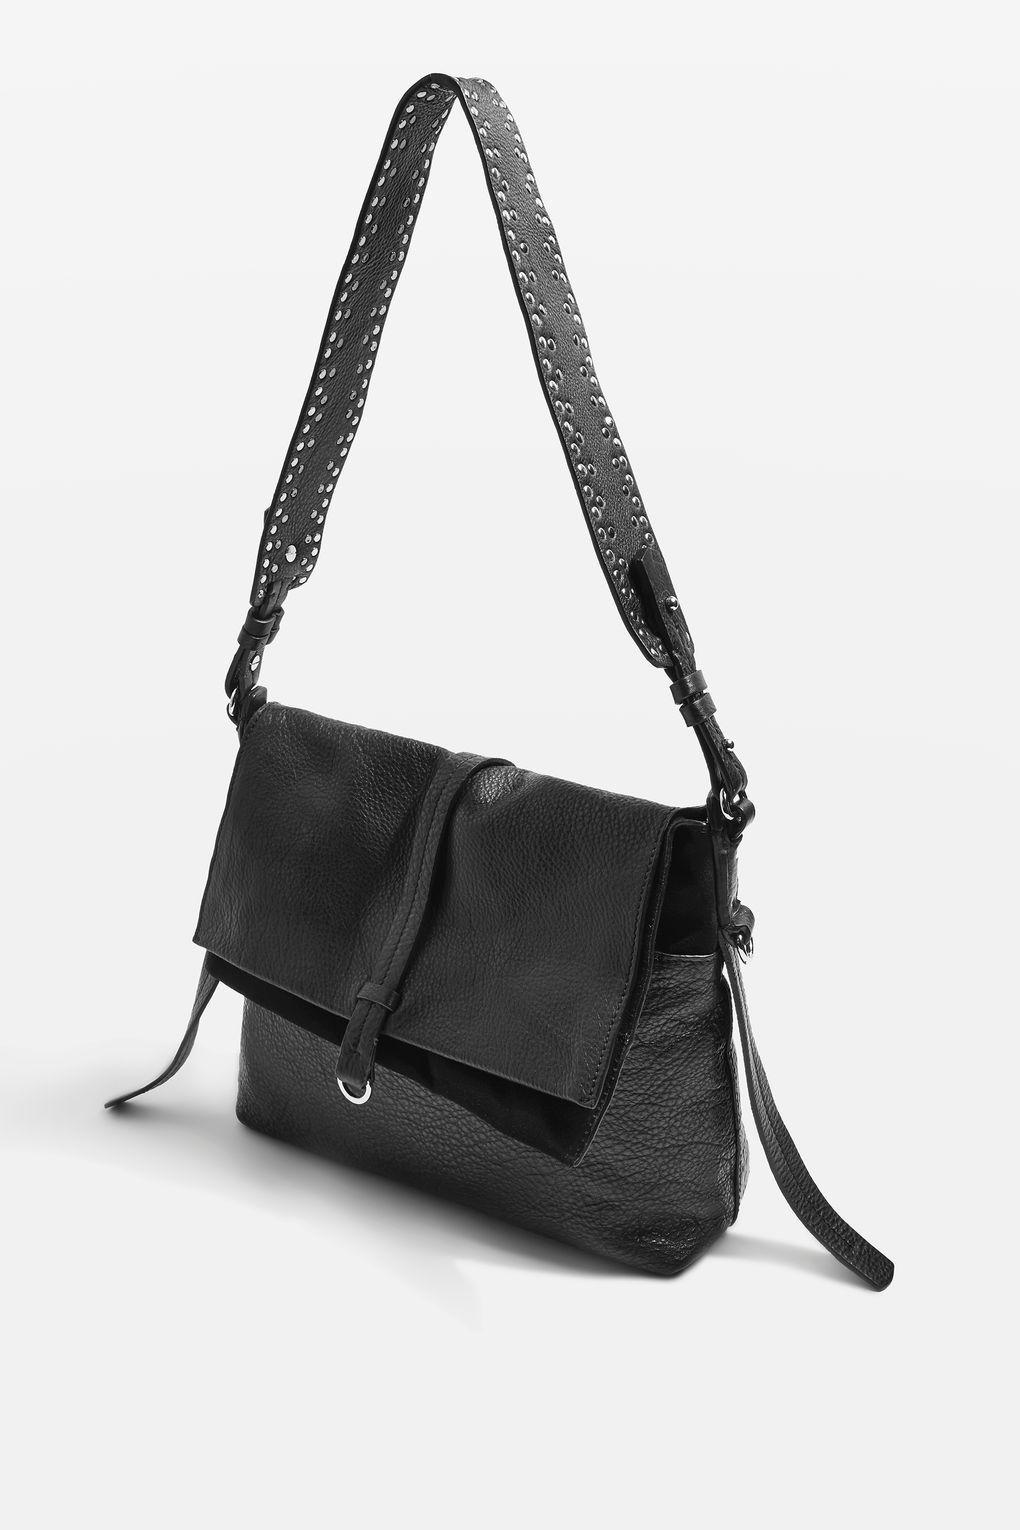 TOPSHOP Premium Leather Small Slouch Hobo Bag in Black - Lyst